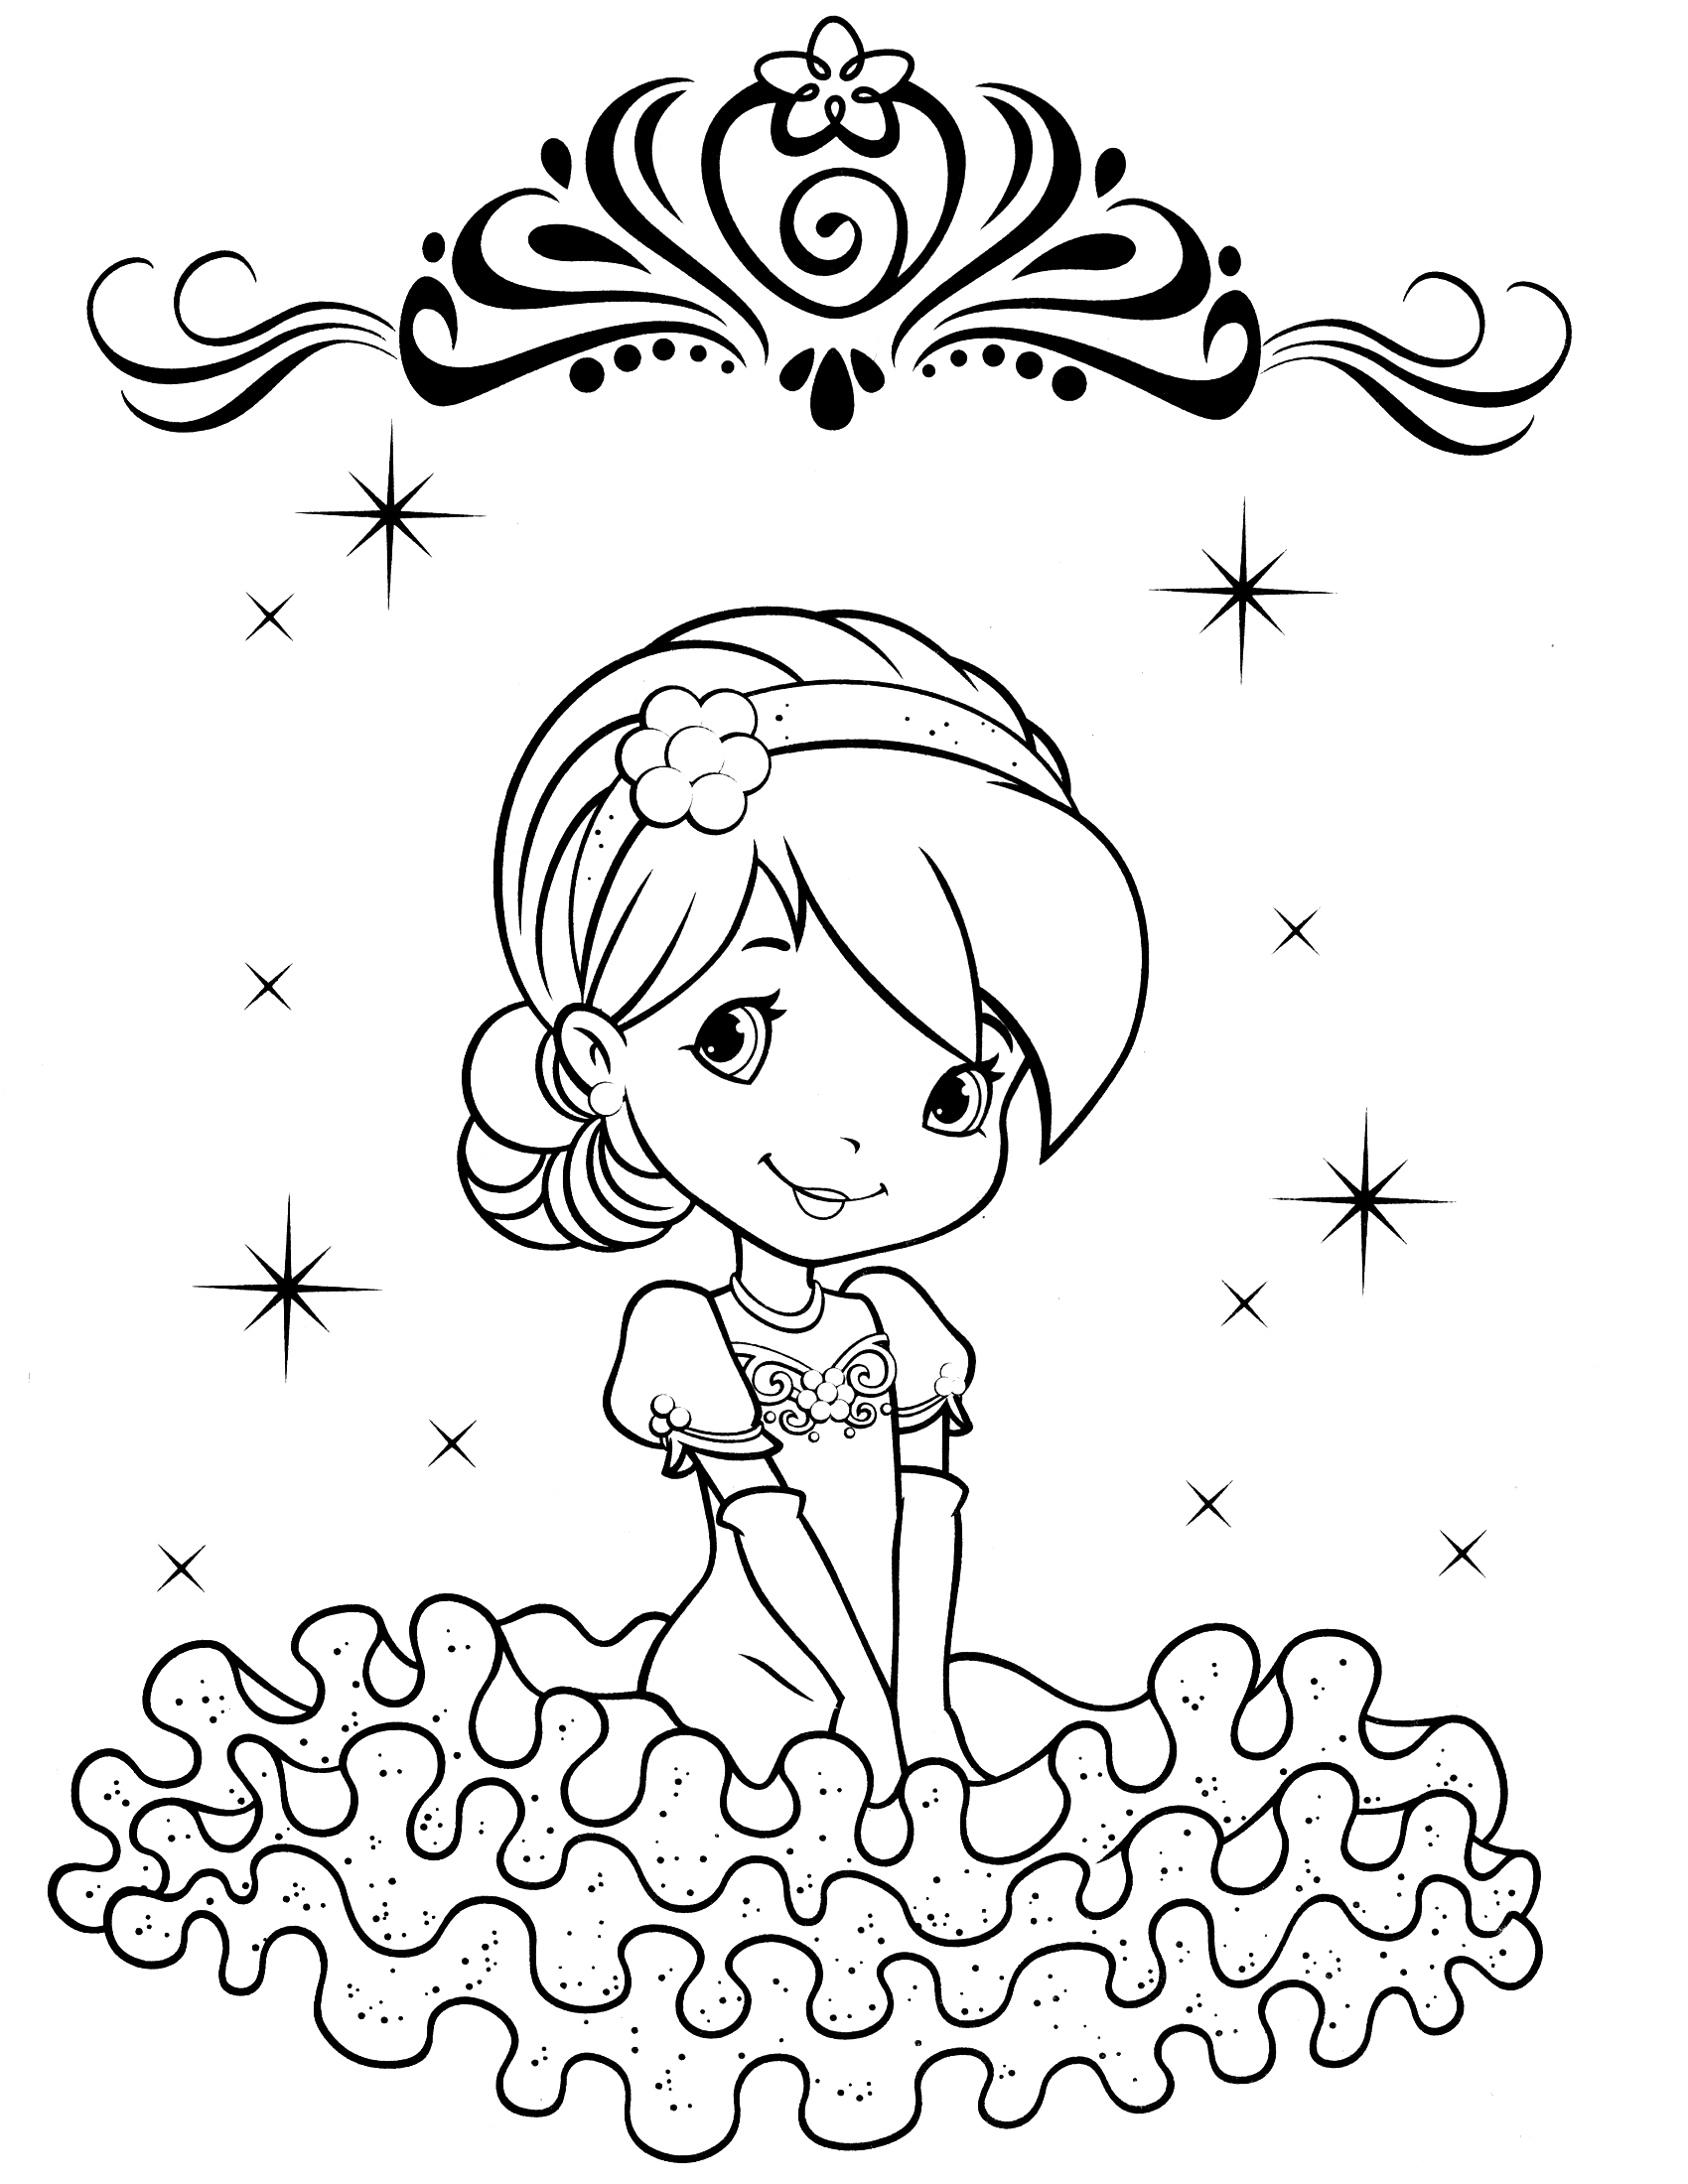 Strawberry Shortcake Coloring Pages Cool coloring pages 21